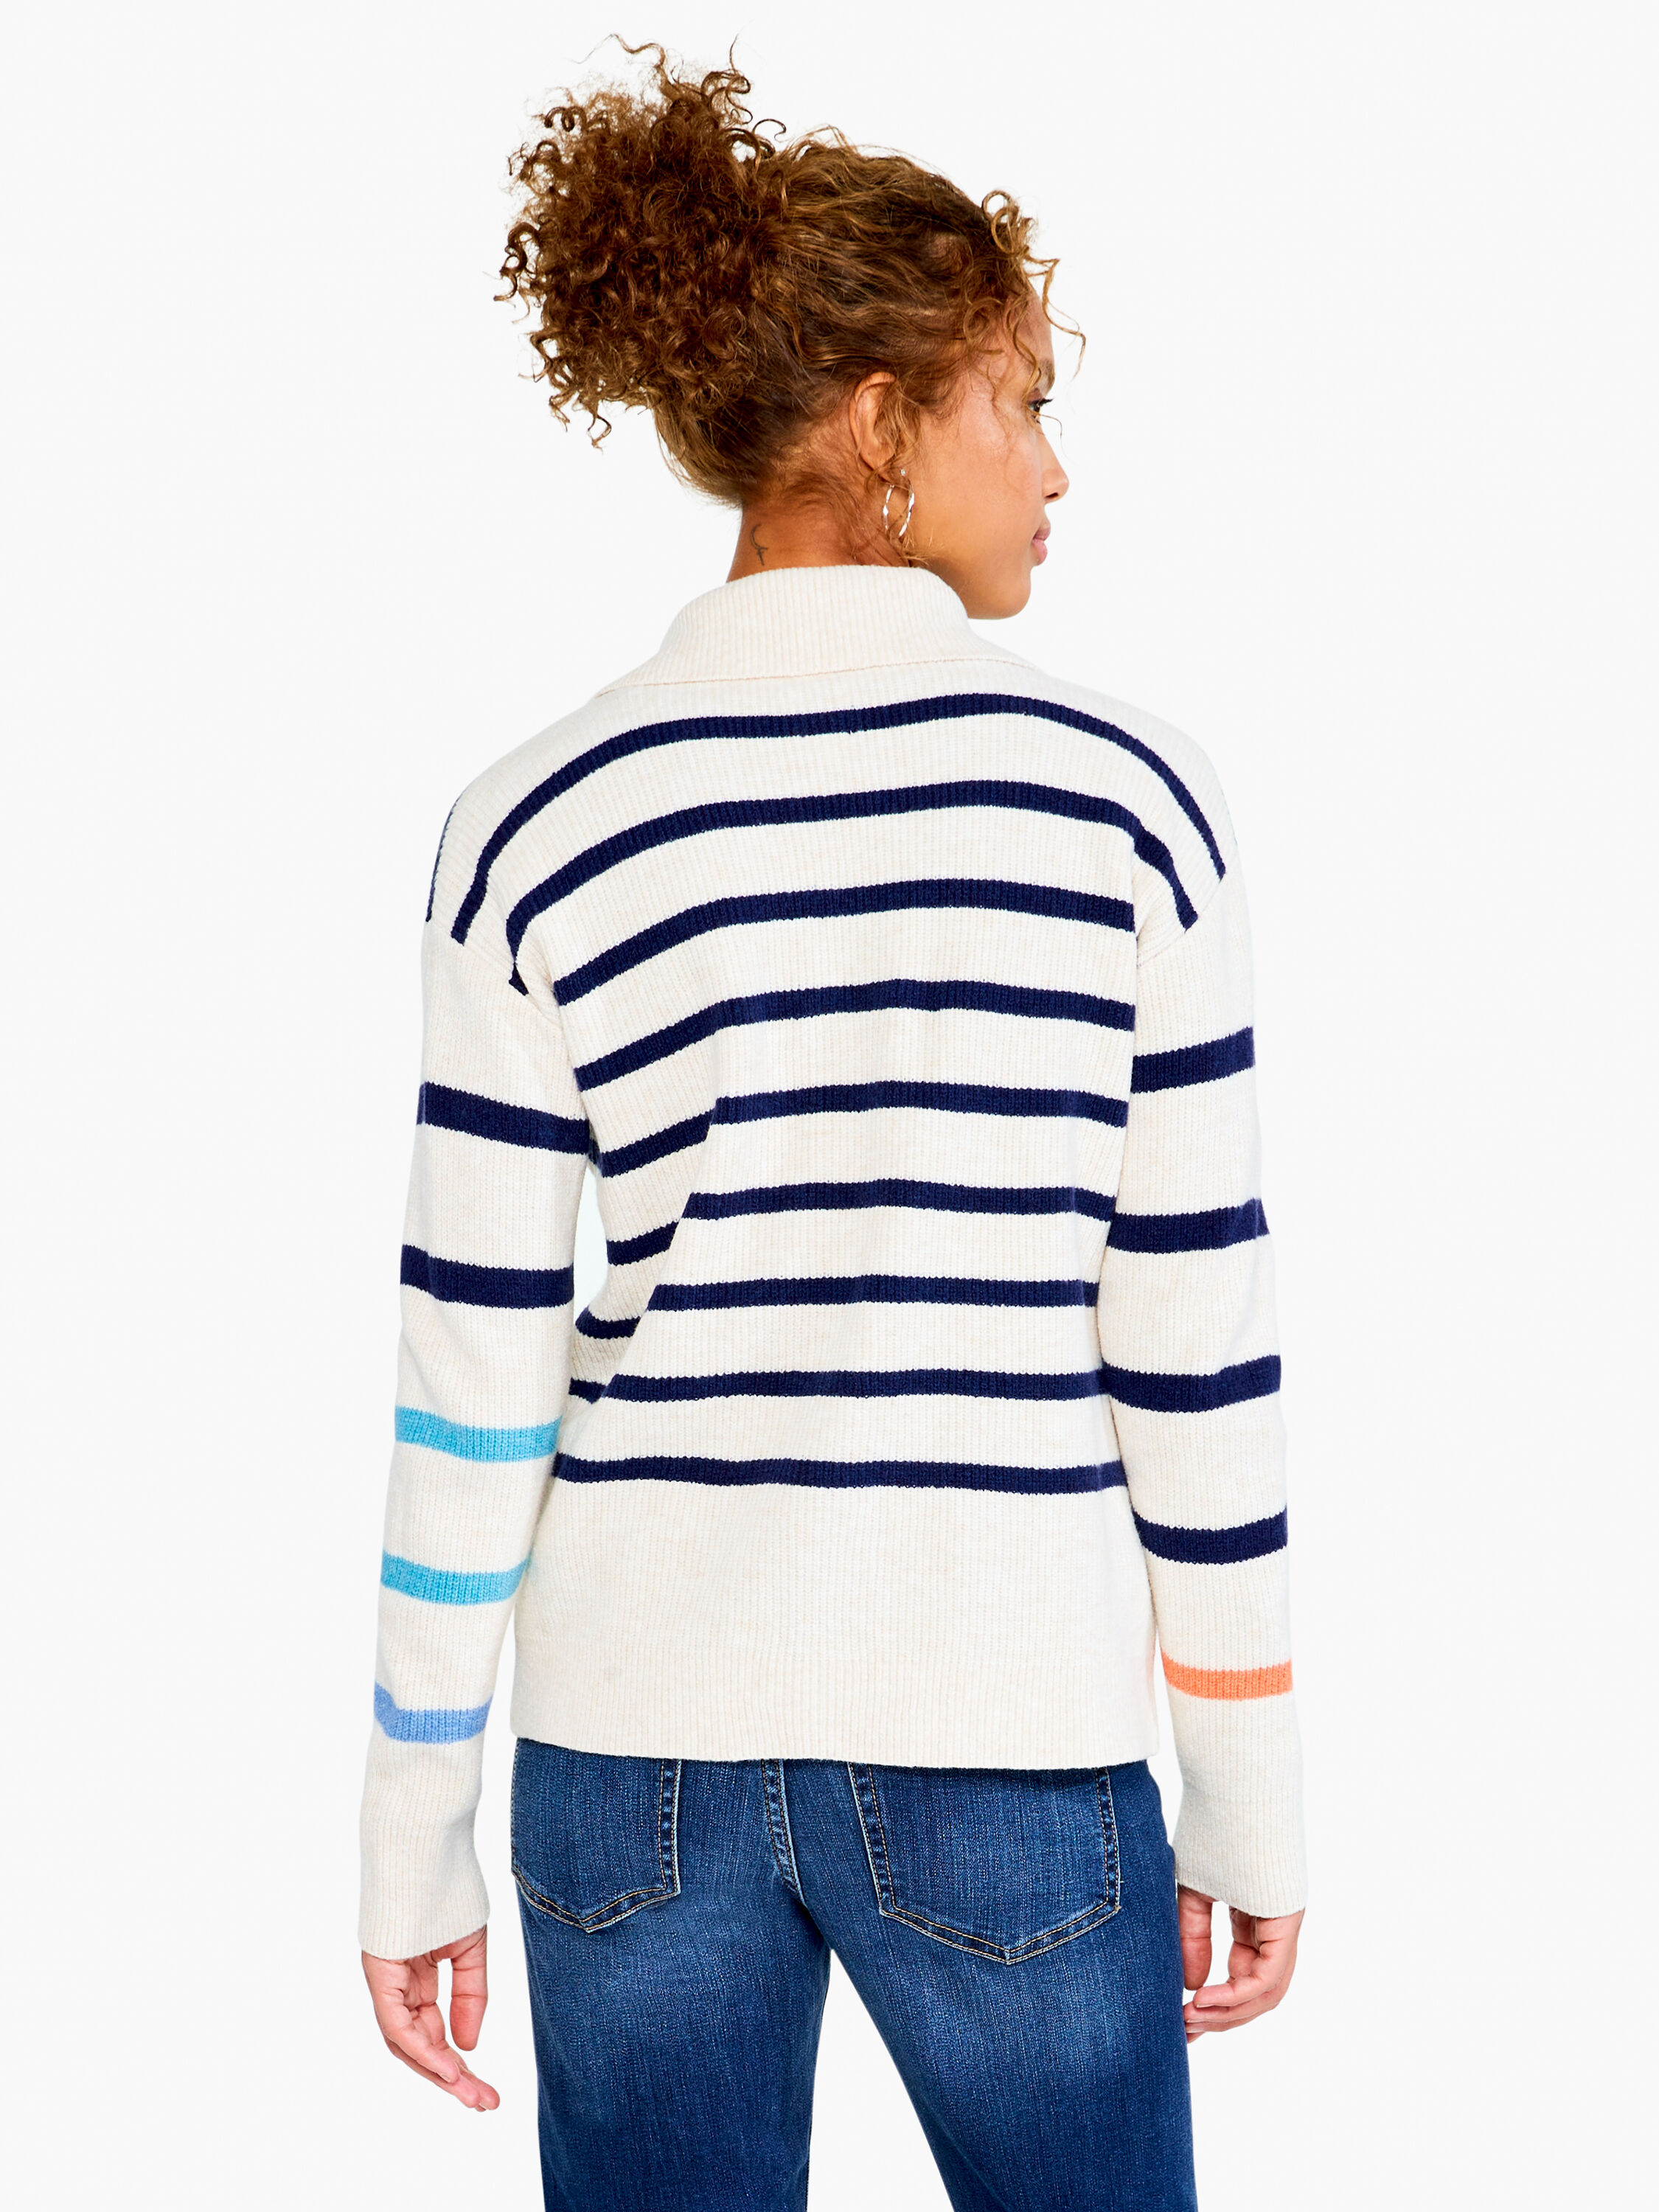 NIC+ZOE Nic+zoe Sailors Stripe Zip Up Cardigan in Blue Womens Clothing Jumpers and knitwear Cardigans 